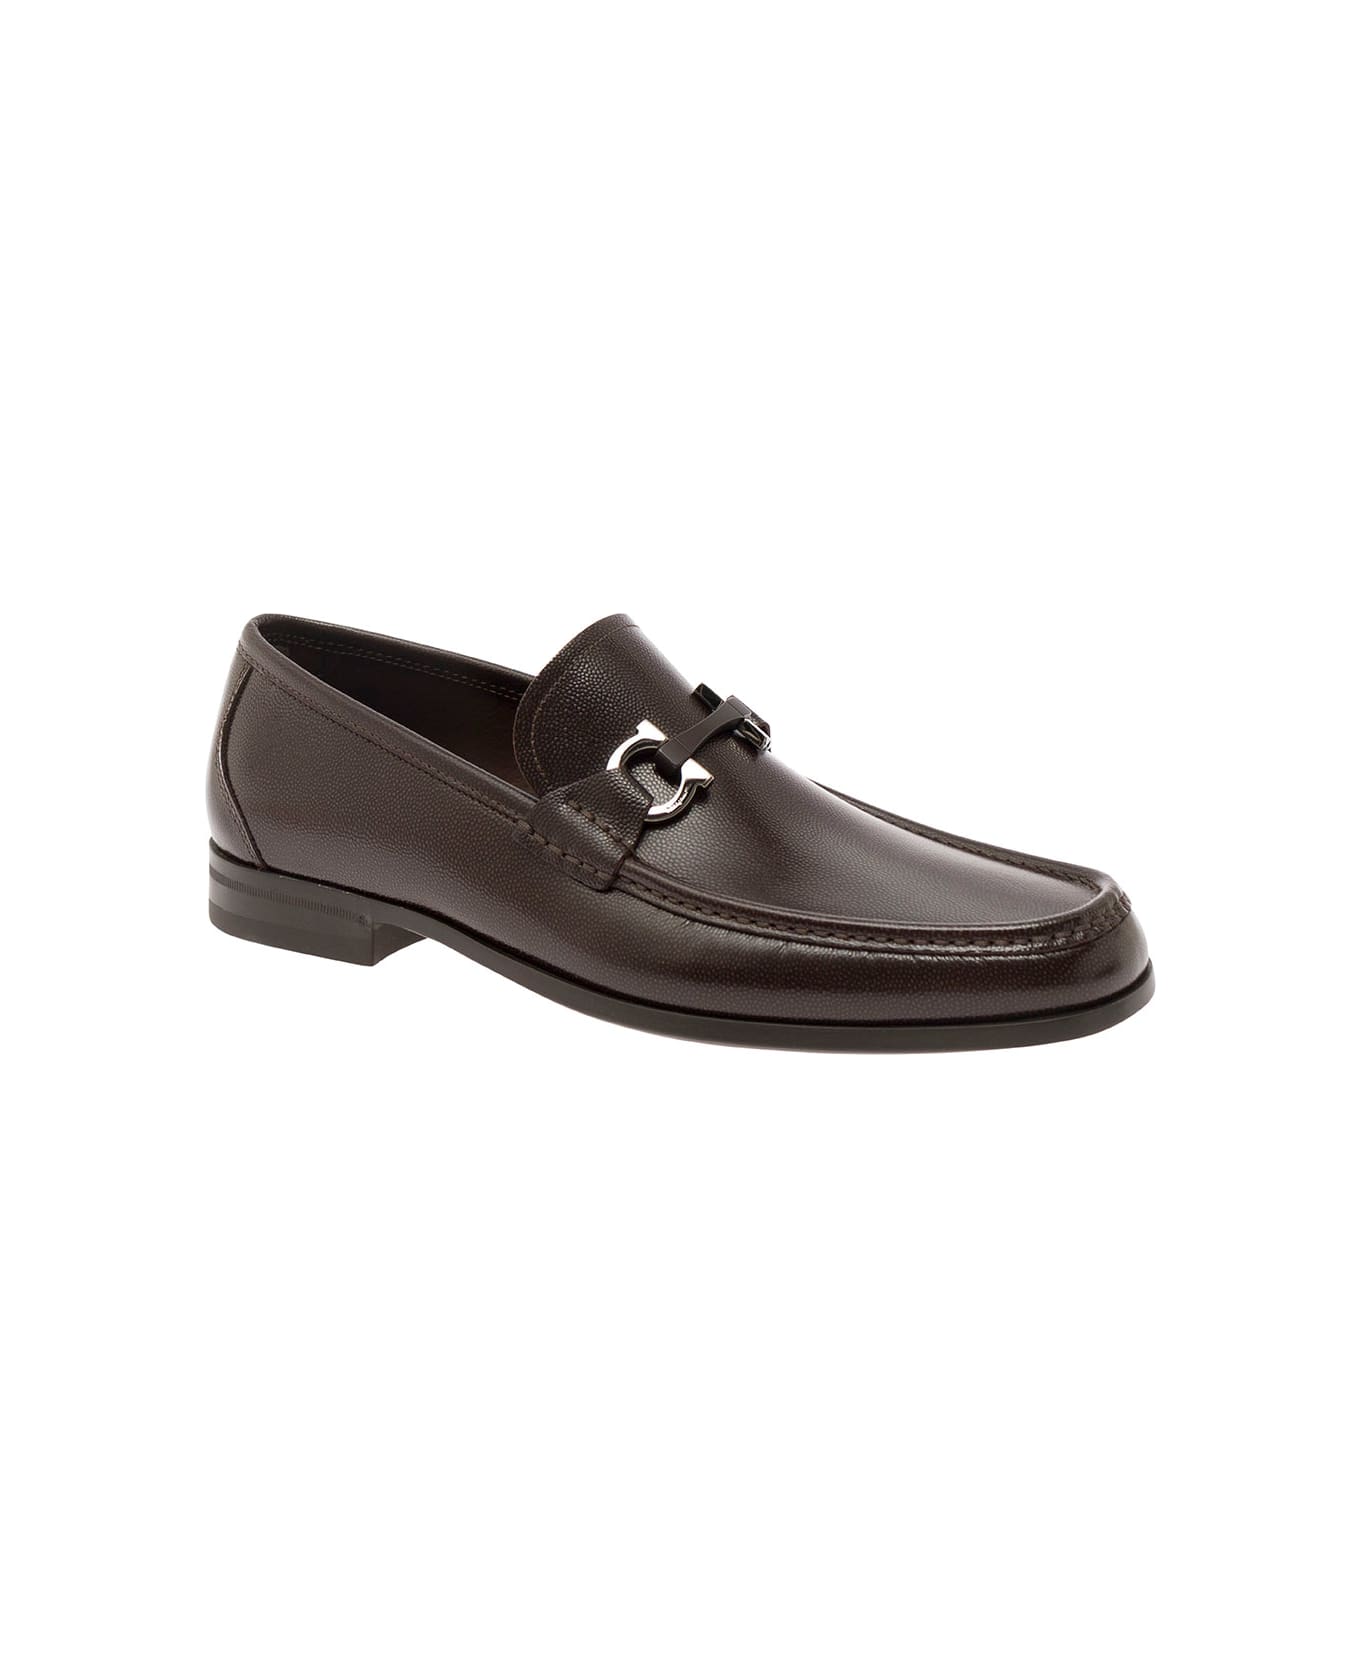 Ferragamo Brown Loafers Wih Gancini Detail In Leather Man - Brown ローファー＆デッキシューズ